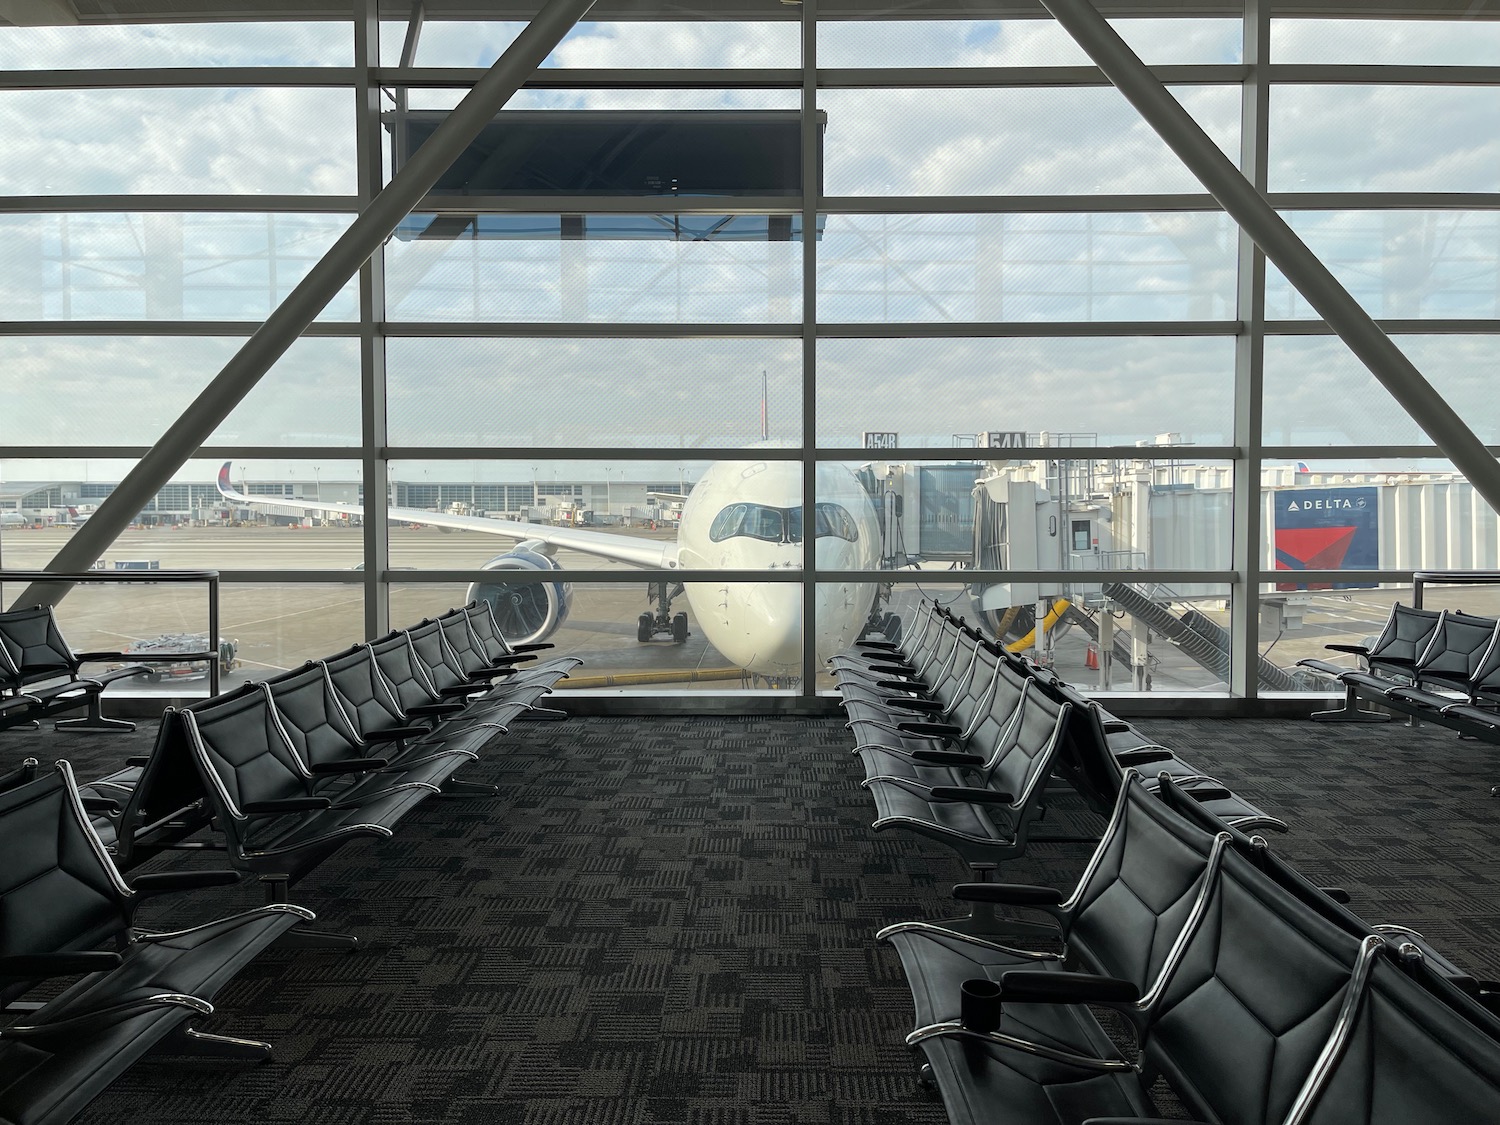 a row of chairs in an airport terminal